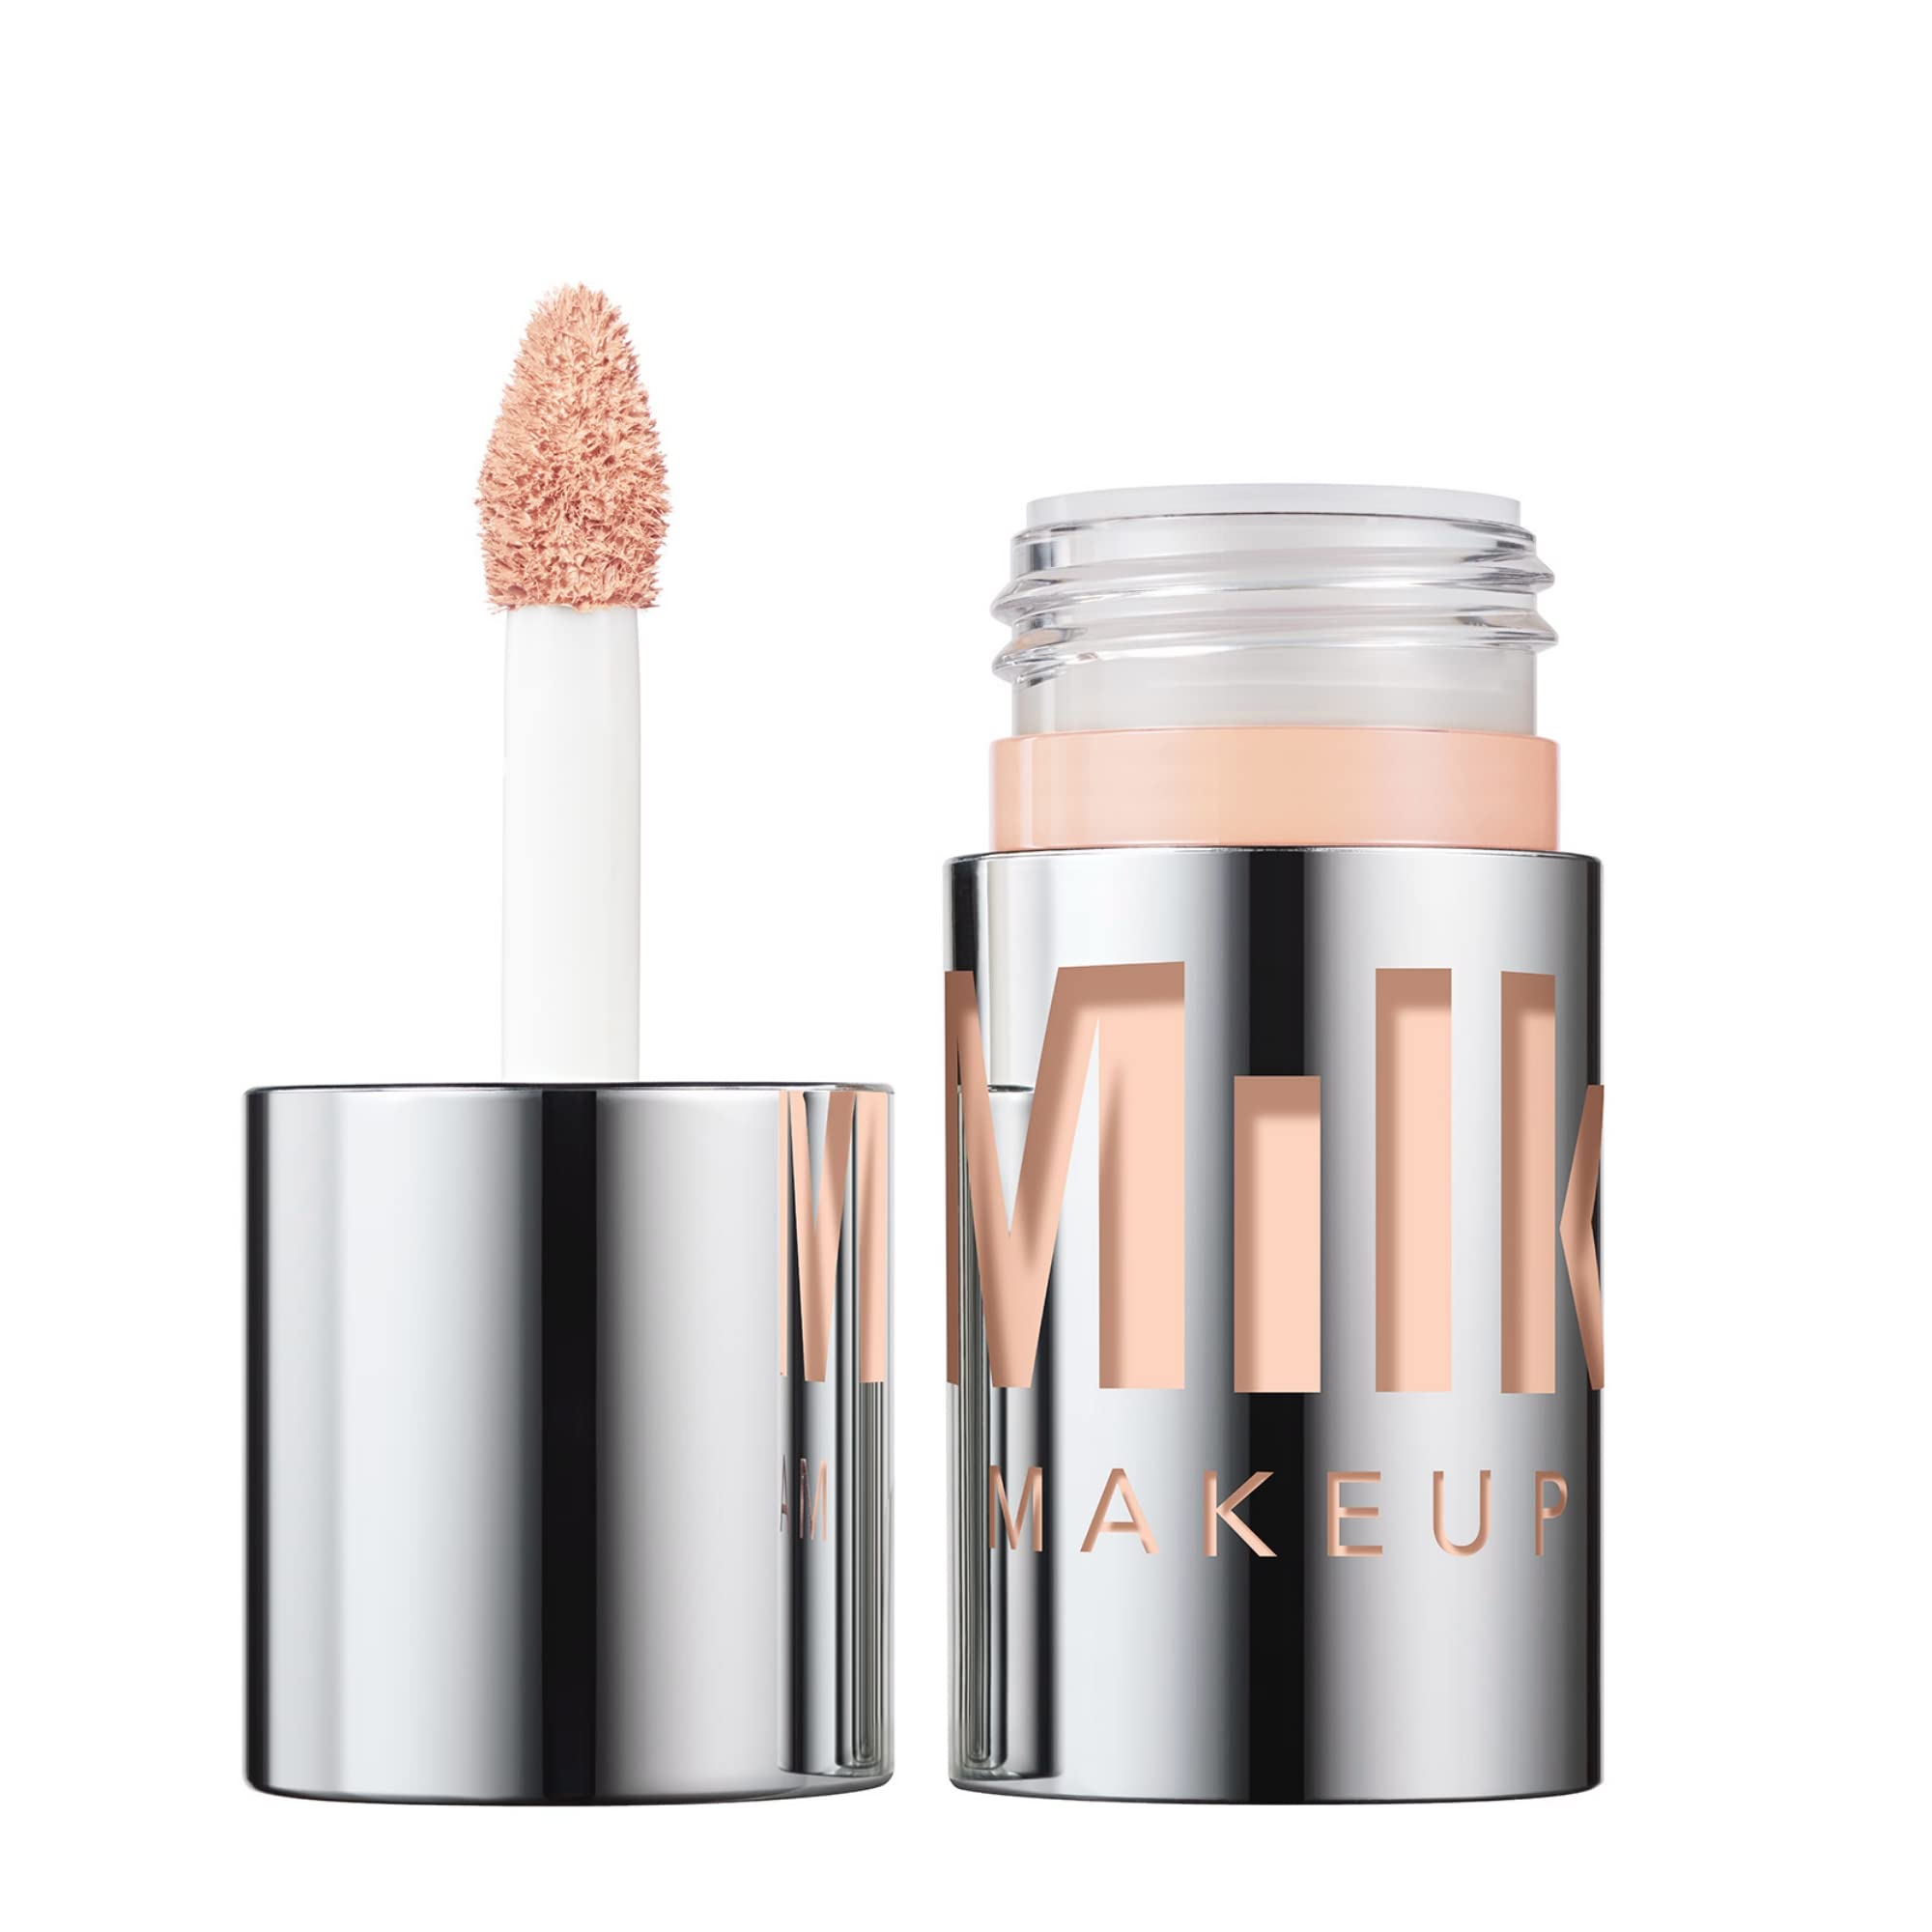 MILK Makeup Future Fluid All Over Cream Concealer for Covering Sculpting  and Hydrating Skin - 0.28 Fl Oz (Shade 3N - Very Fair with Neutral  Undertones)